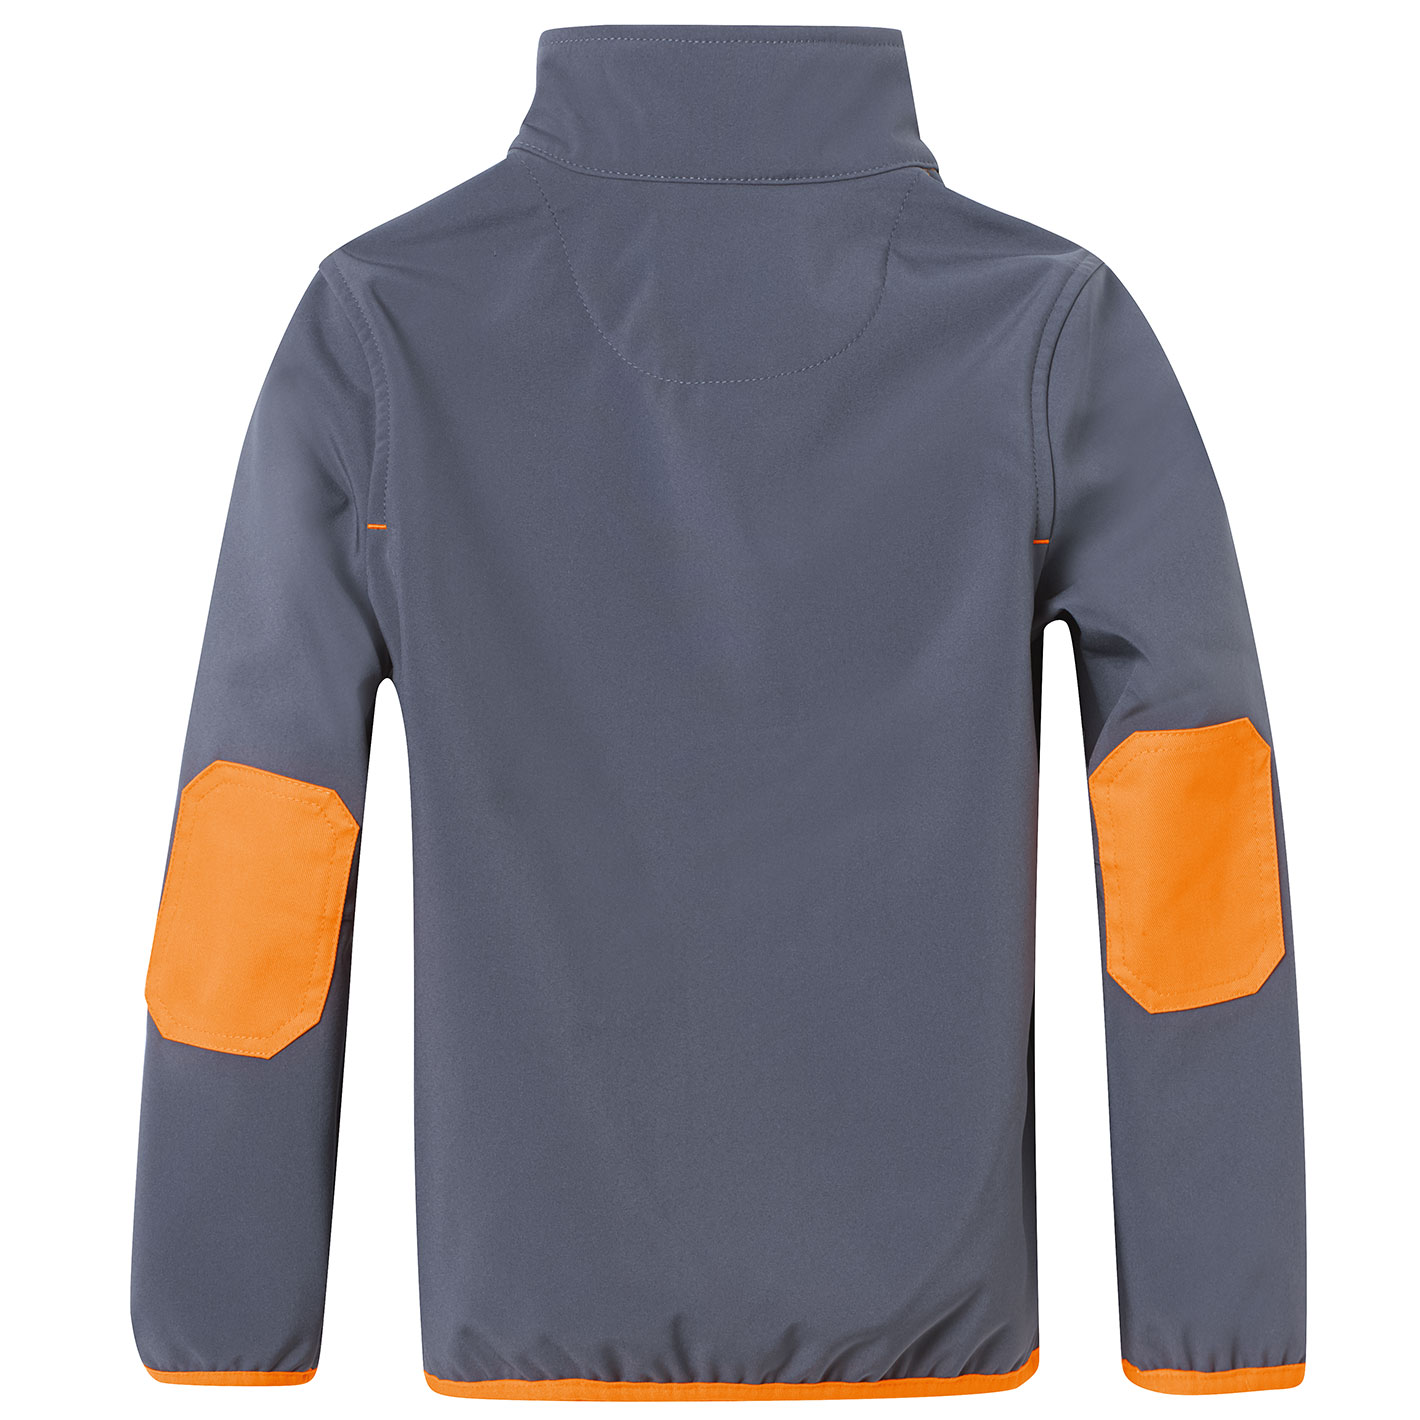 Veste softshell, taille